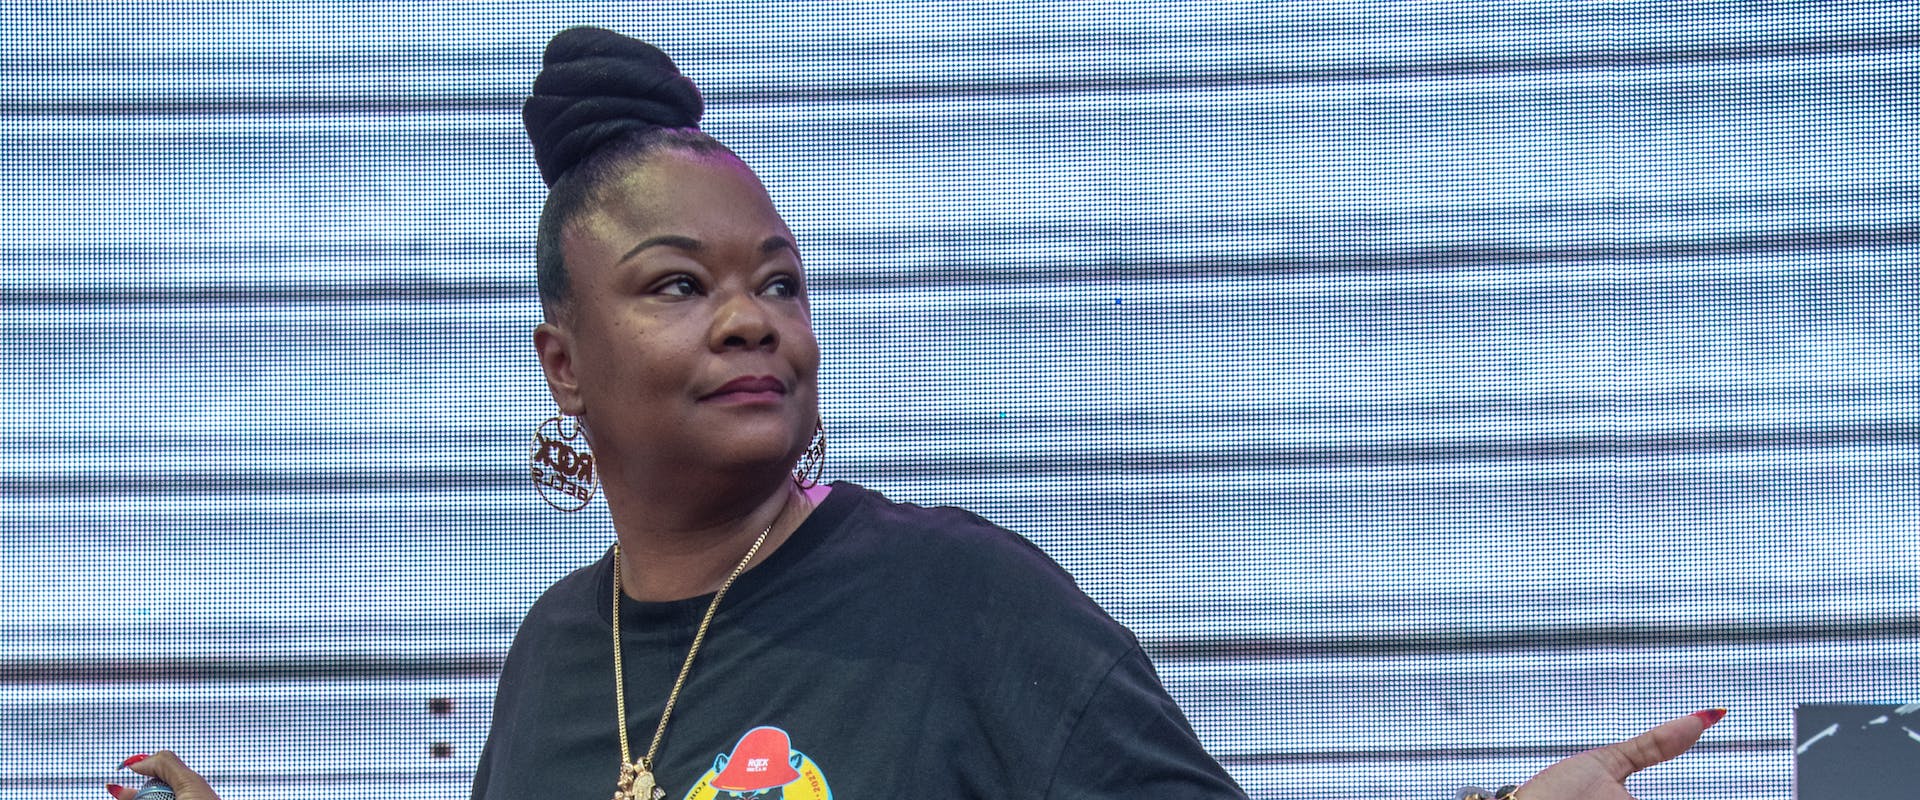 Roxanne Shante onstage at the 2022 Rock The Bells Festival at Forest Hills Stadium in Forest Hills, Queens, NYC. Aug. 6 2022